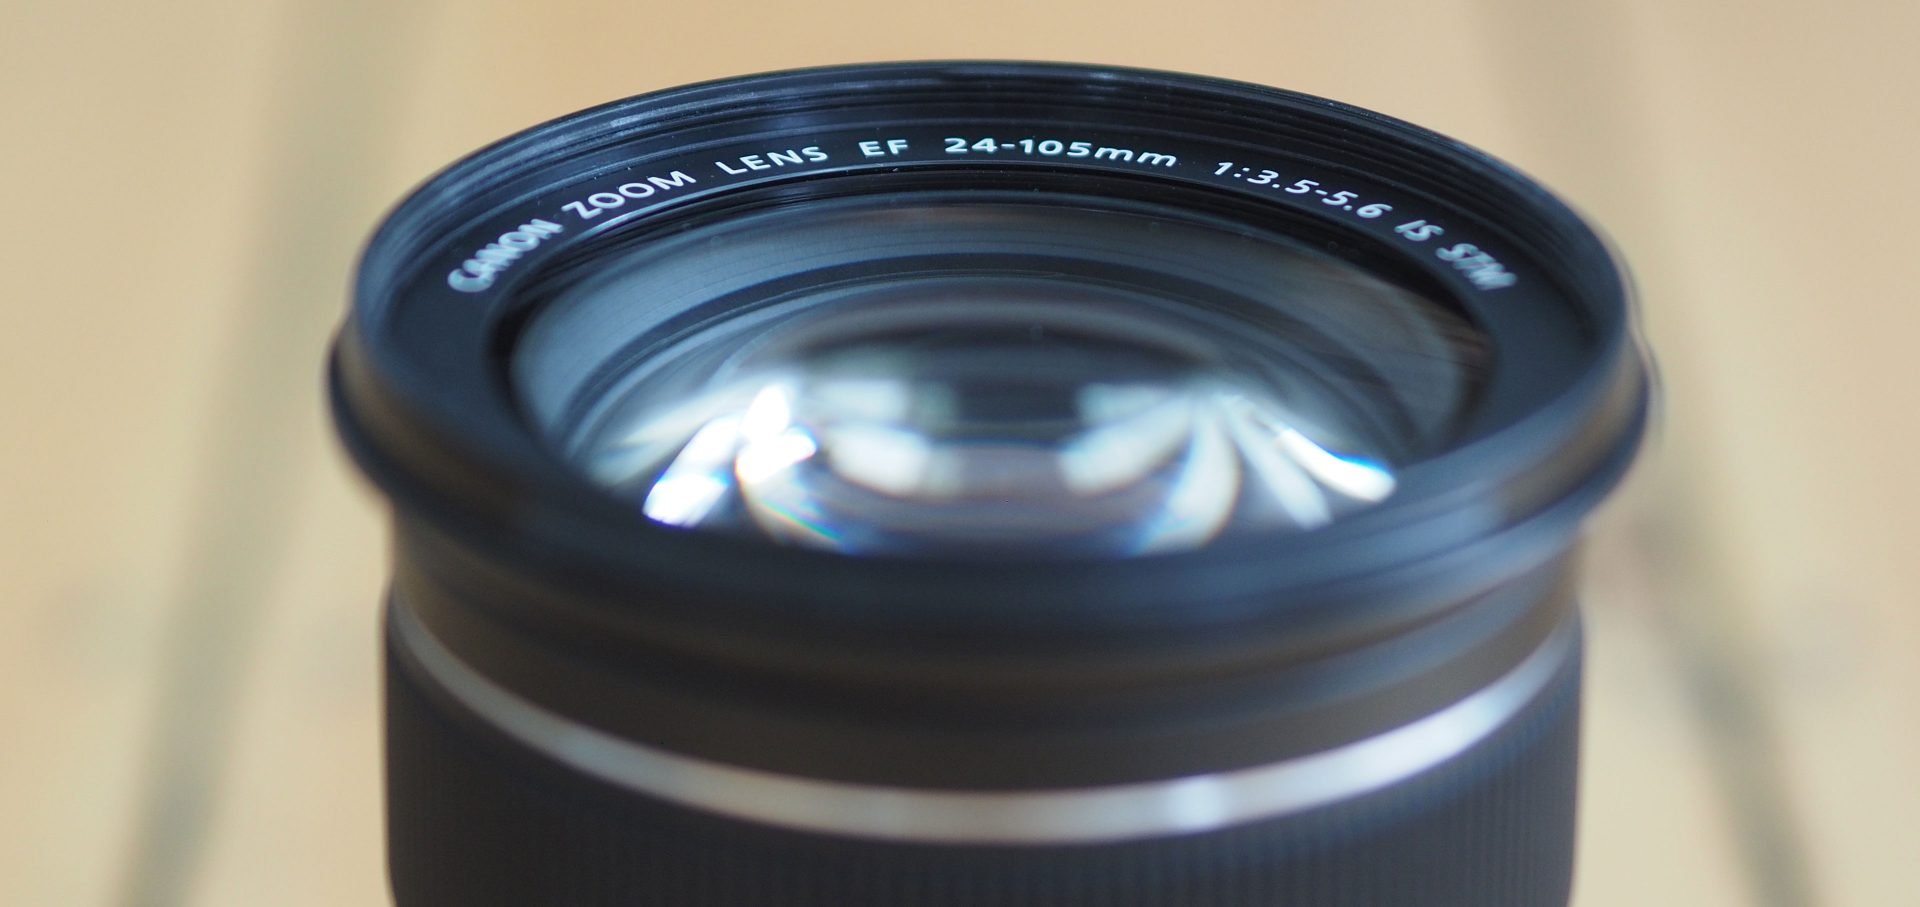 Canon EF 24-105mm STM review so far | Cameralabs